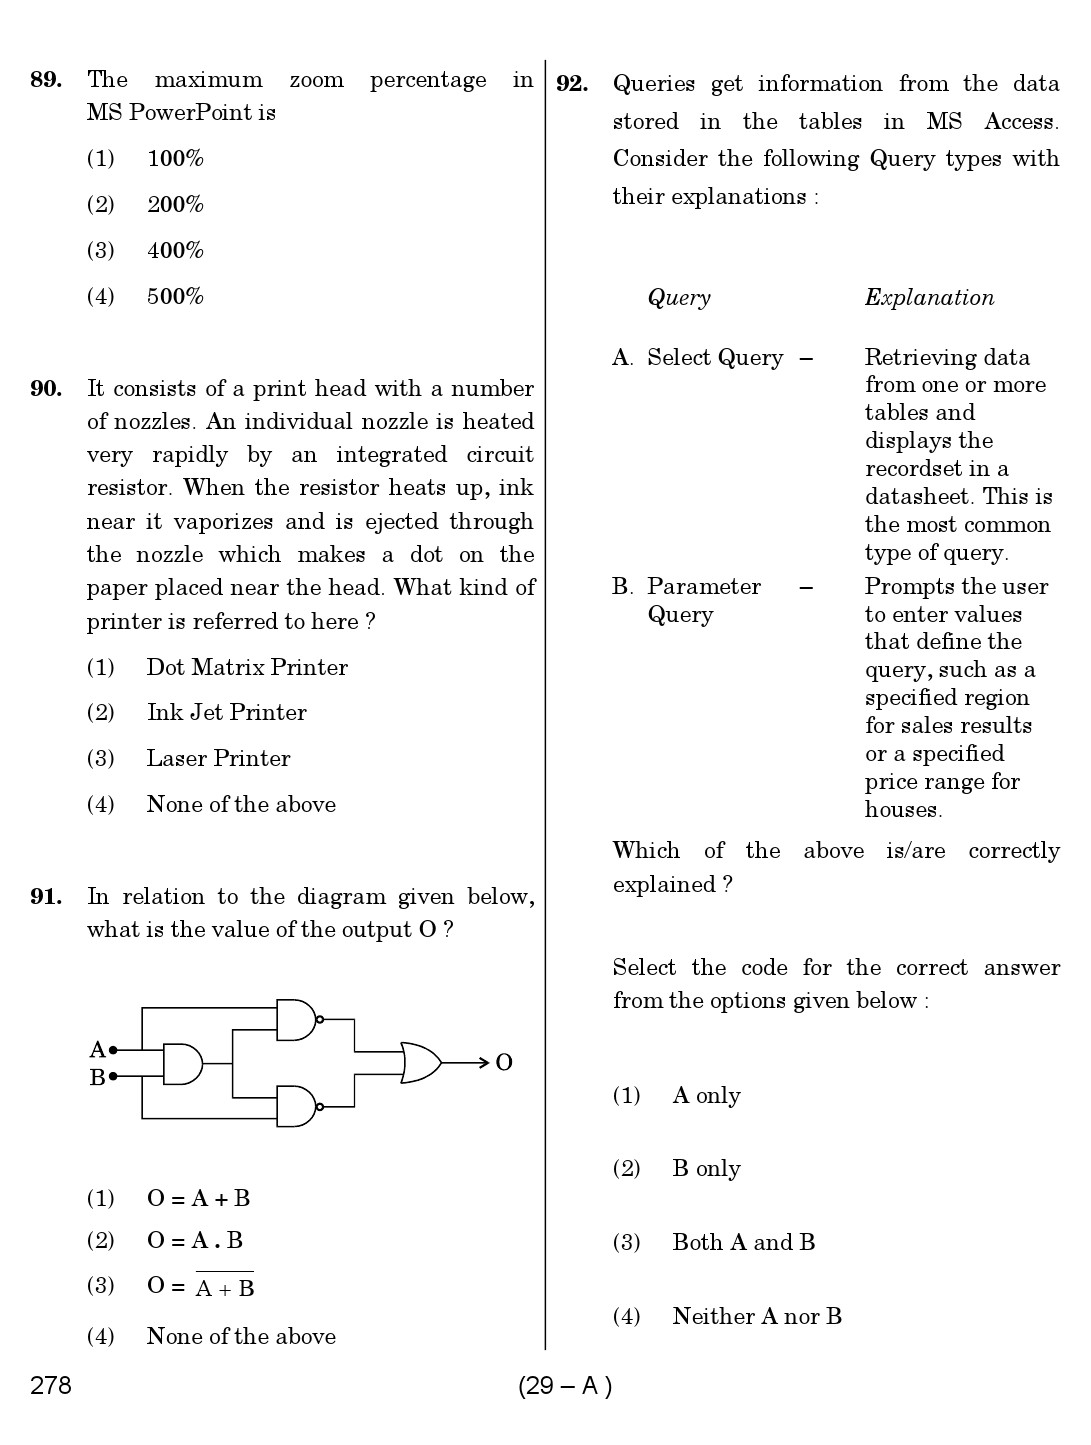 Karnataka PSC First Division Computer Assistants Exam Sample Question Paper 278 29